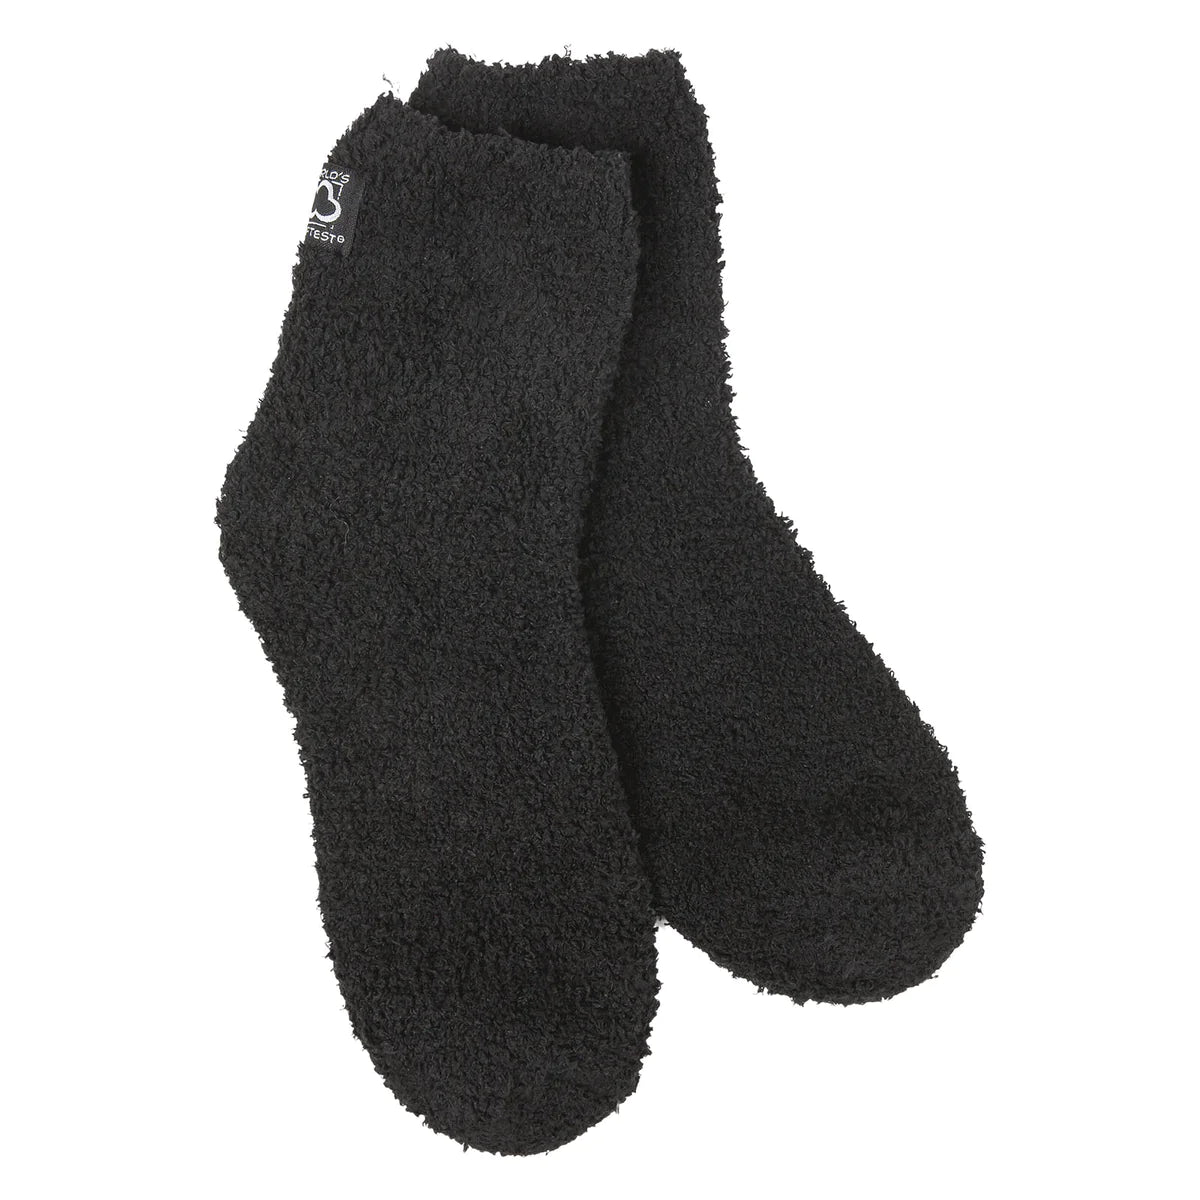 World's Softest Cozy Quarter Socks with Grippers